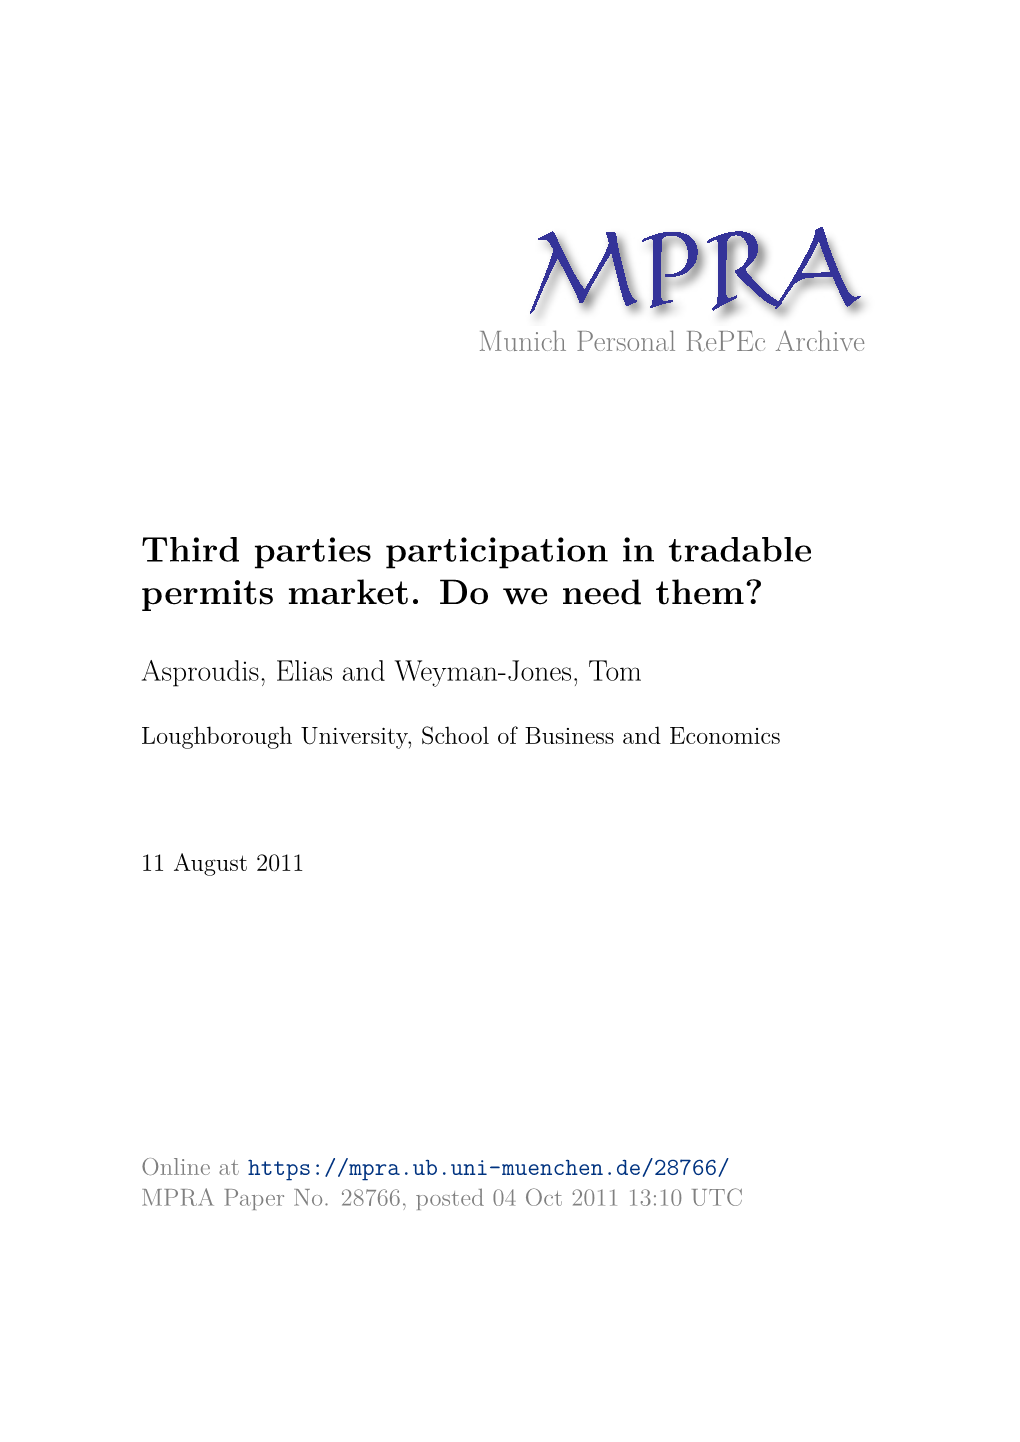 Third Parties Participation in Tradable Permits Market. Do We Need Them?